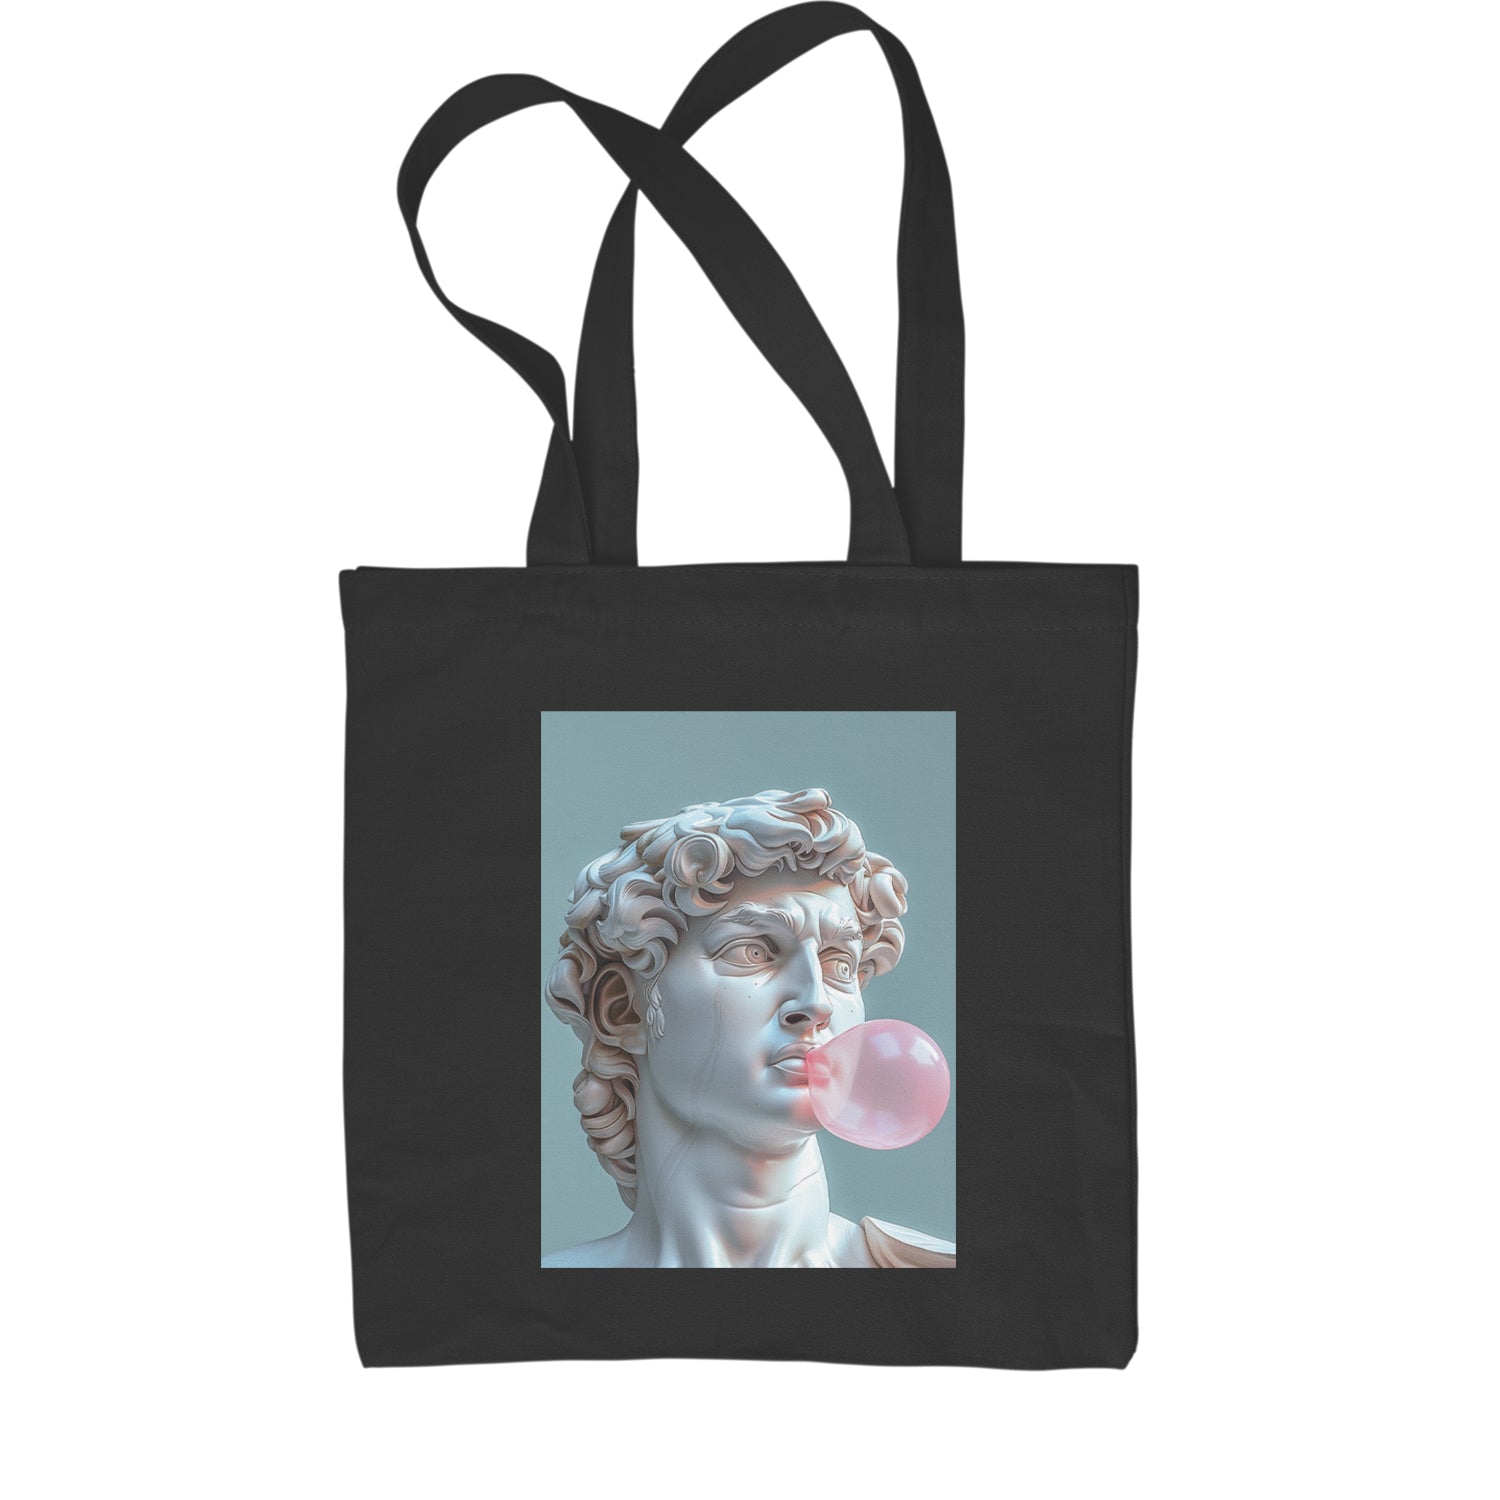 Michelangelo's David with Bubble Gum Contemporary Statue Art Shopping Tote Bag